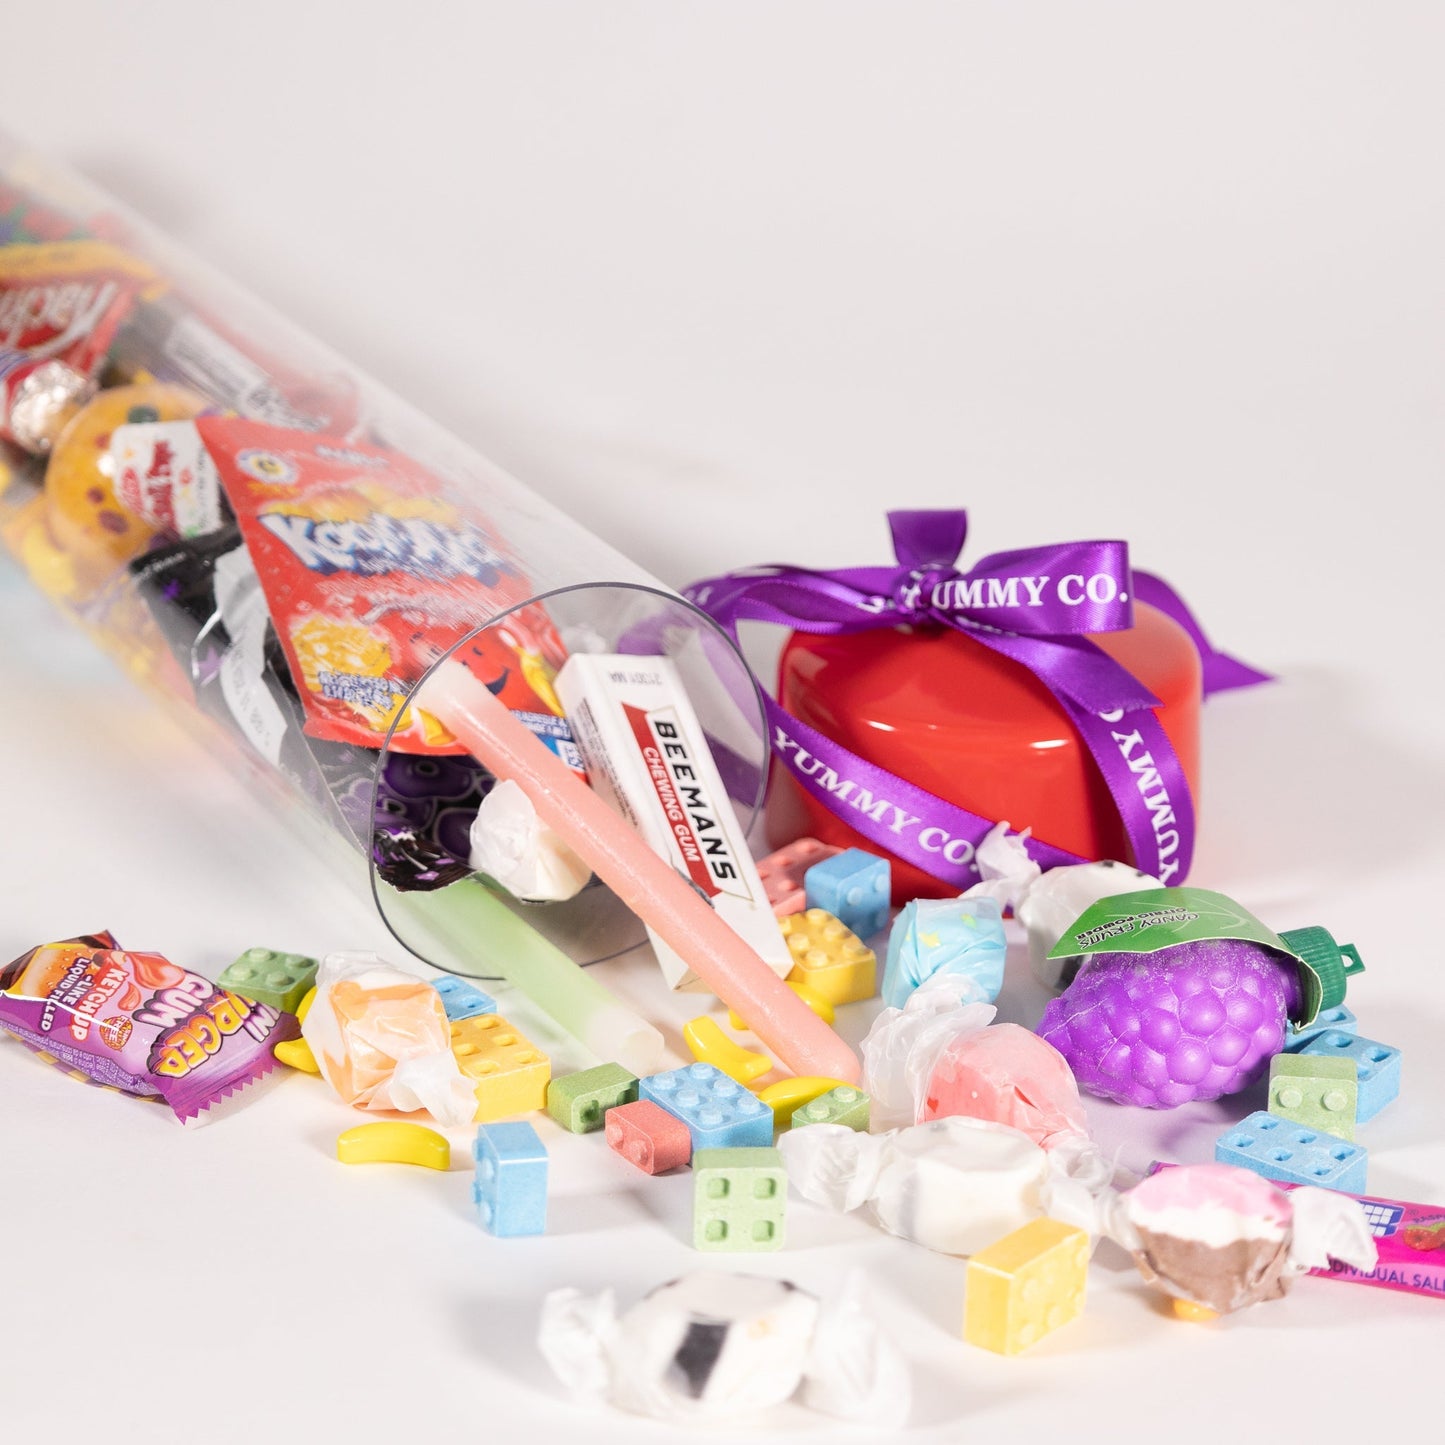 1960s Candy Time Capsule